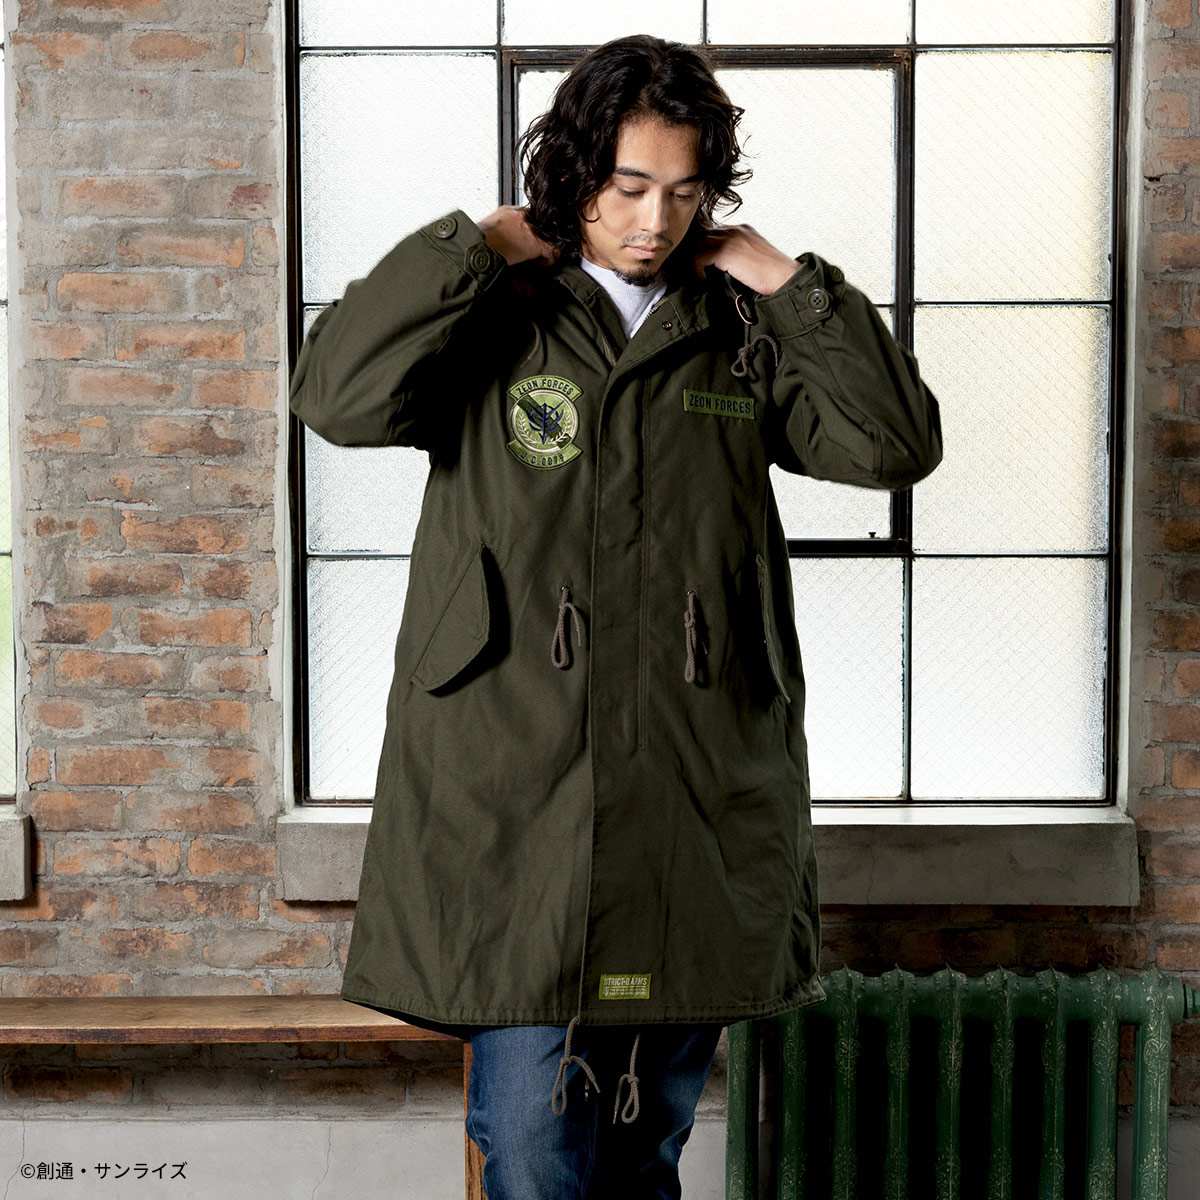 STRICT-G.ARMS『機動戦士ガンダム』M-51 PARKA ZEON FORCES